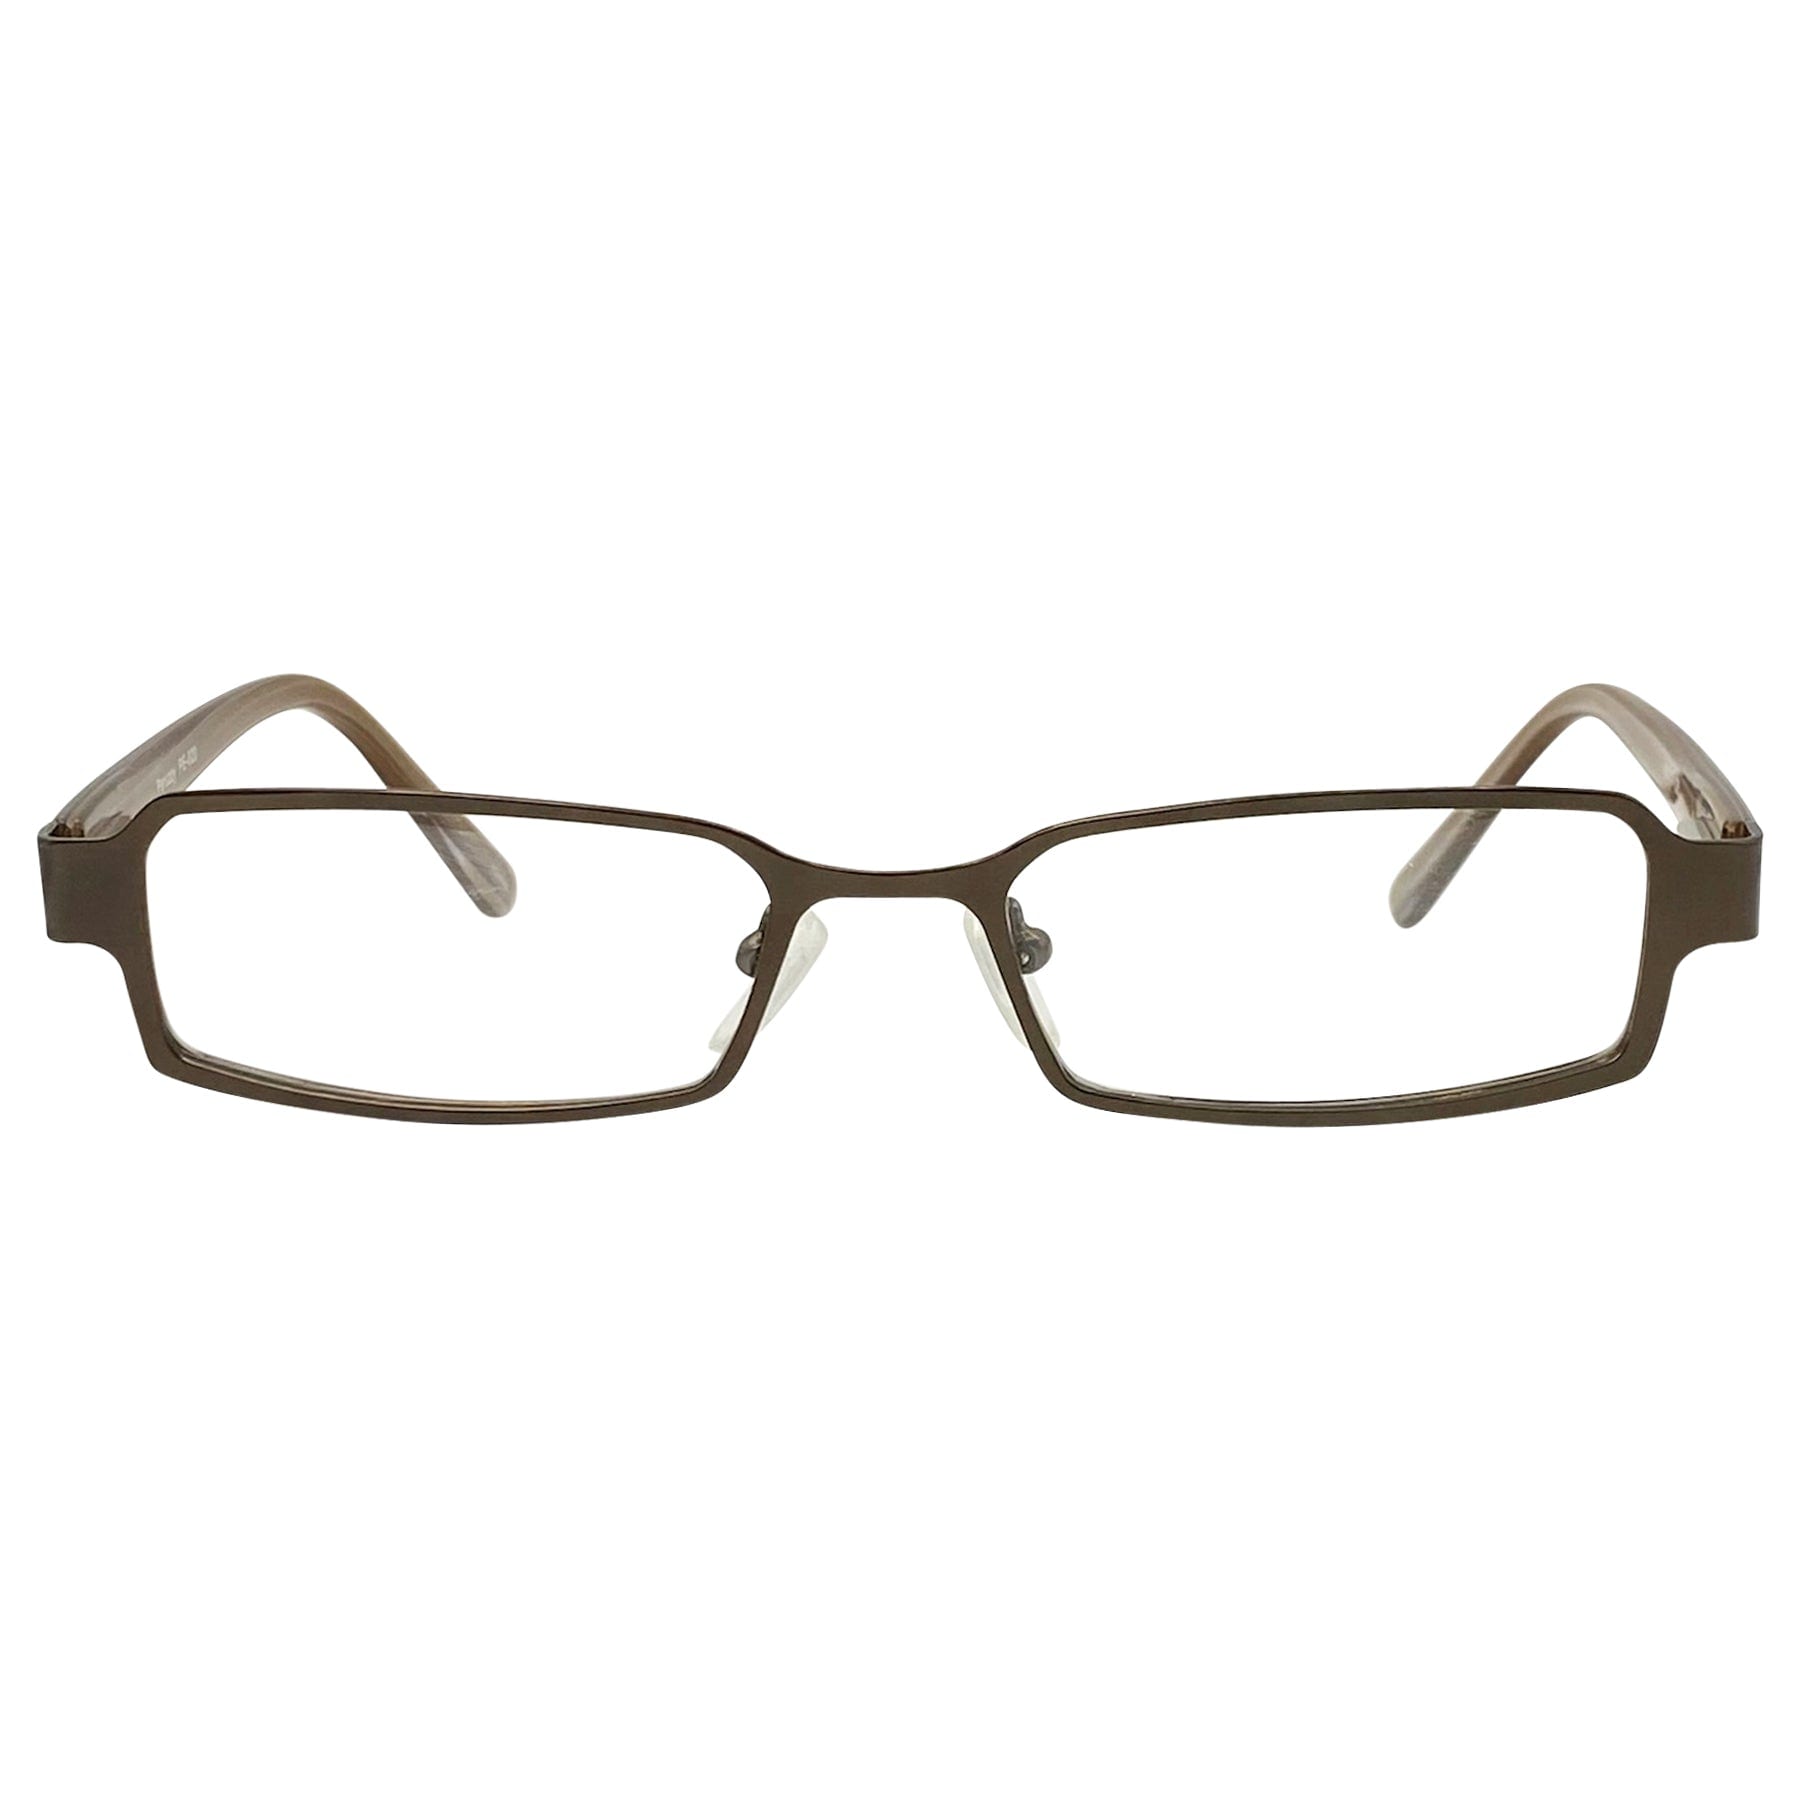 vintage frames with a copper metal and clear lens